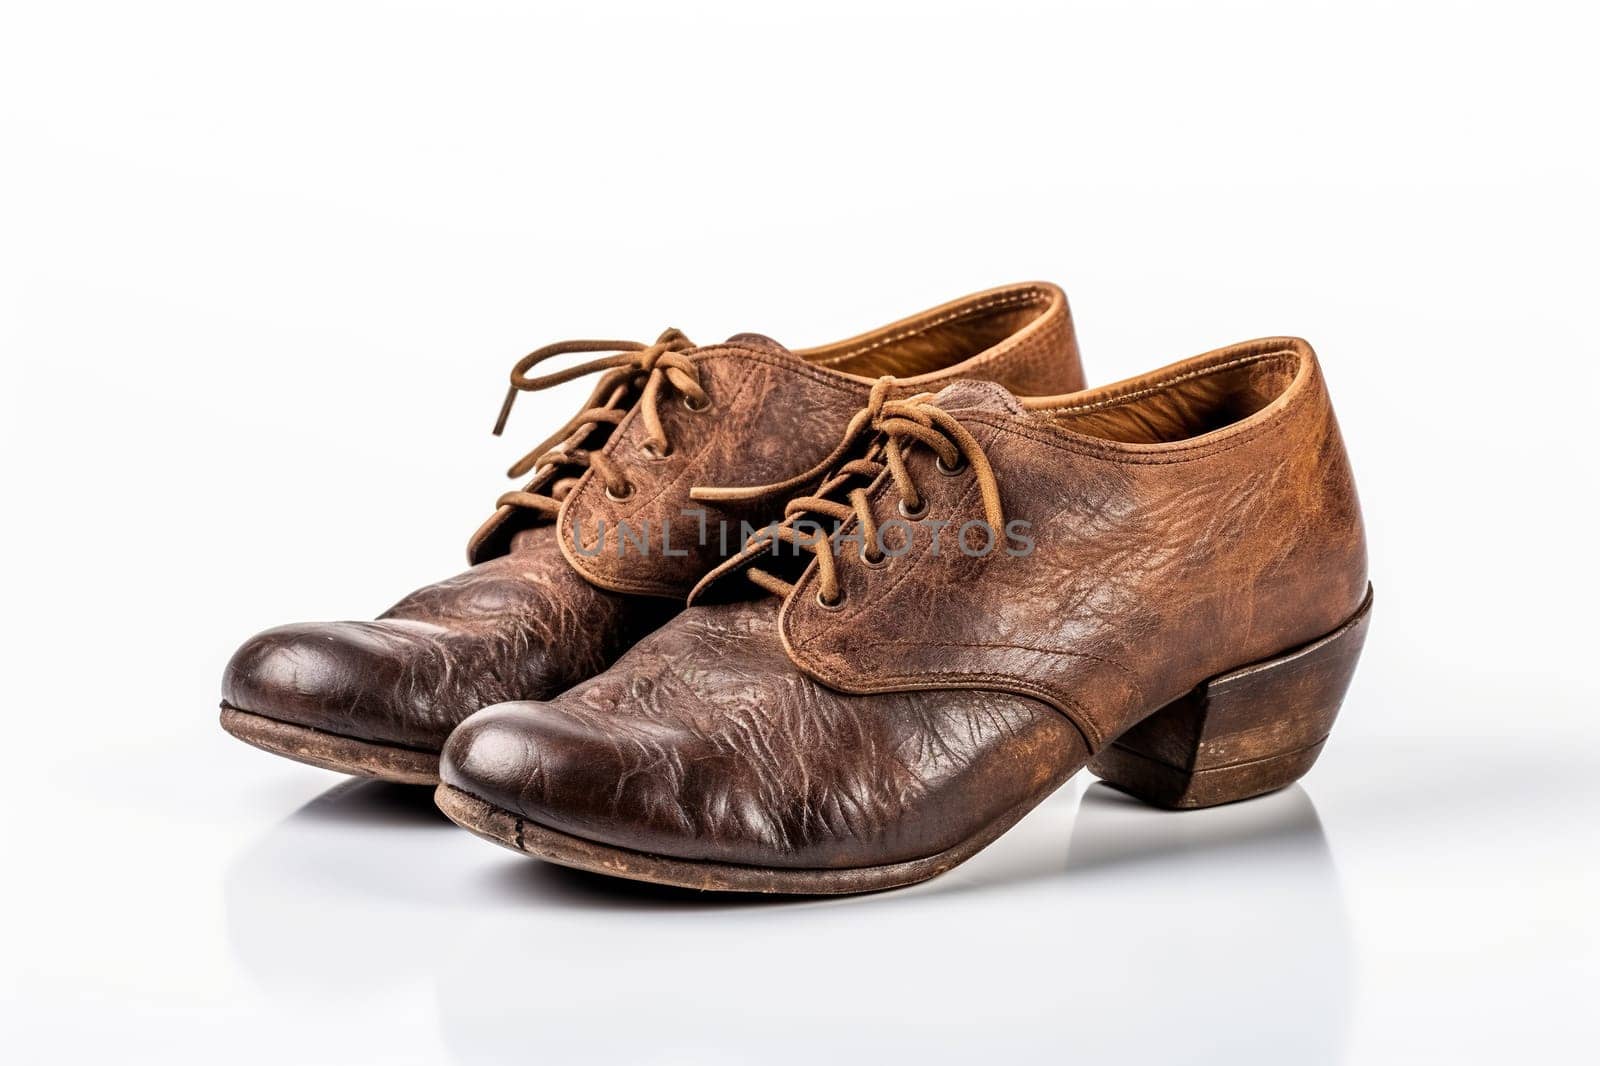 Old worn leather men's shoes on a white background. Generated by artificial intelligence by Vovmar